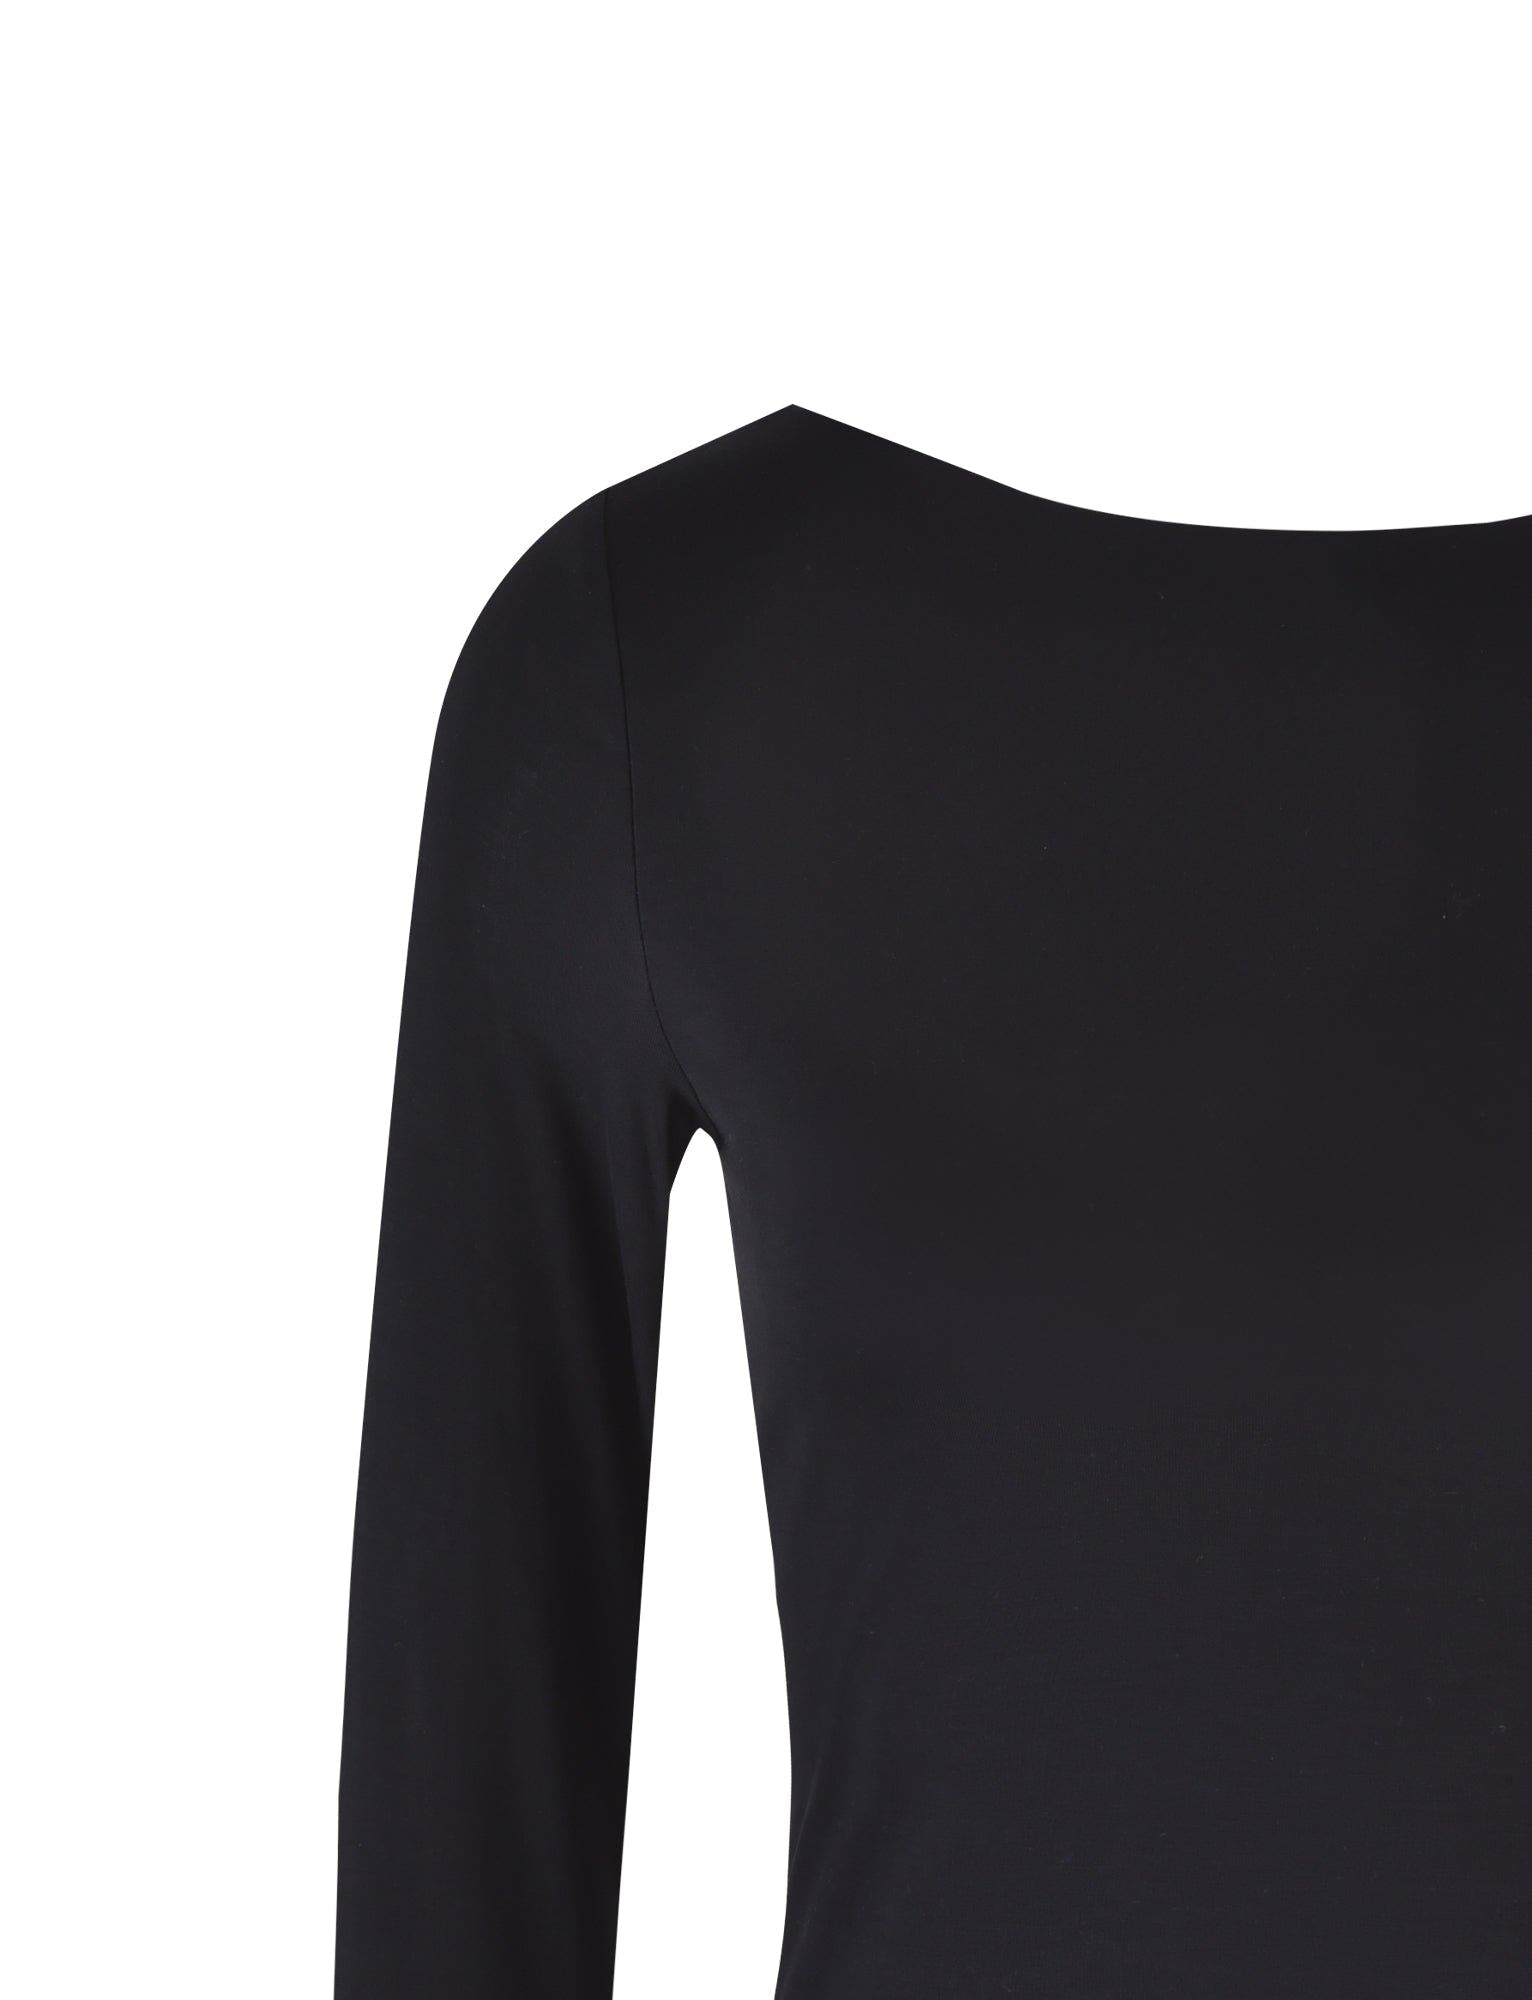 QUINNELL TOP - BLACK